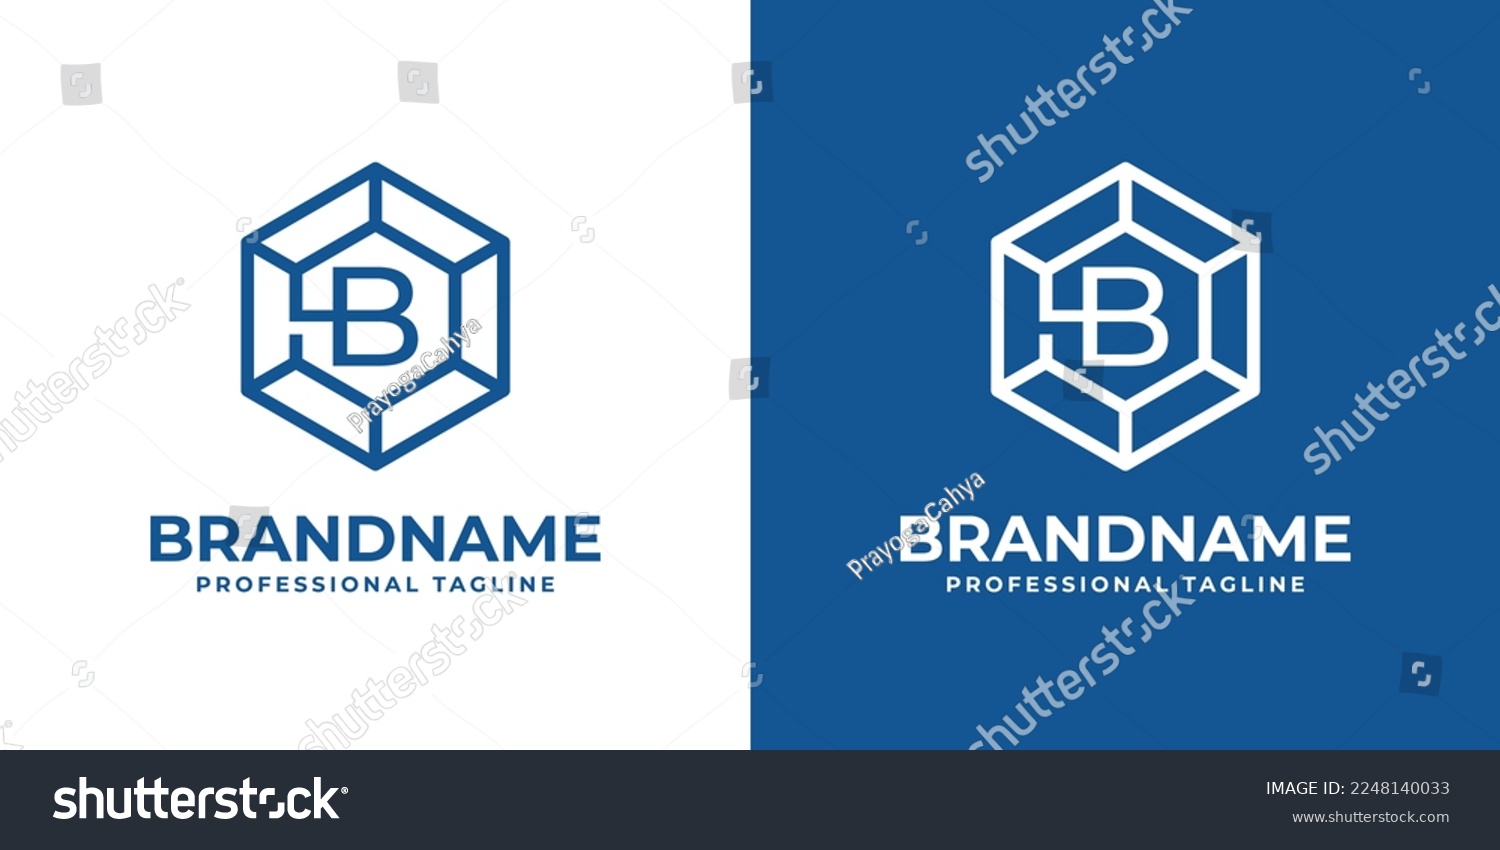 SVG of Initial B Hexagon Diamond Logo, suitable for any business with B initial. svg